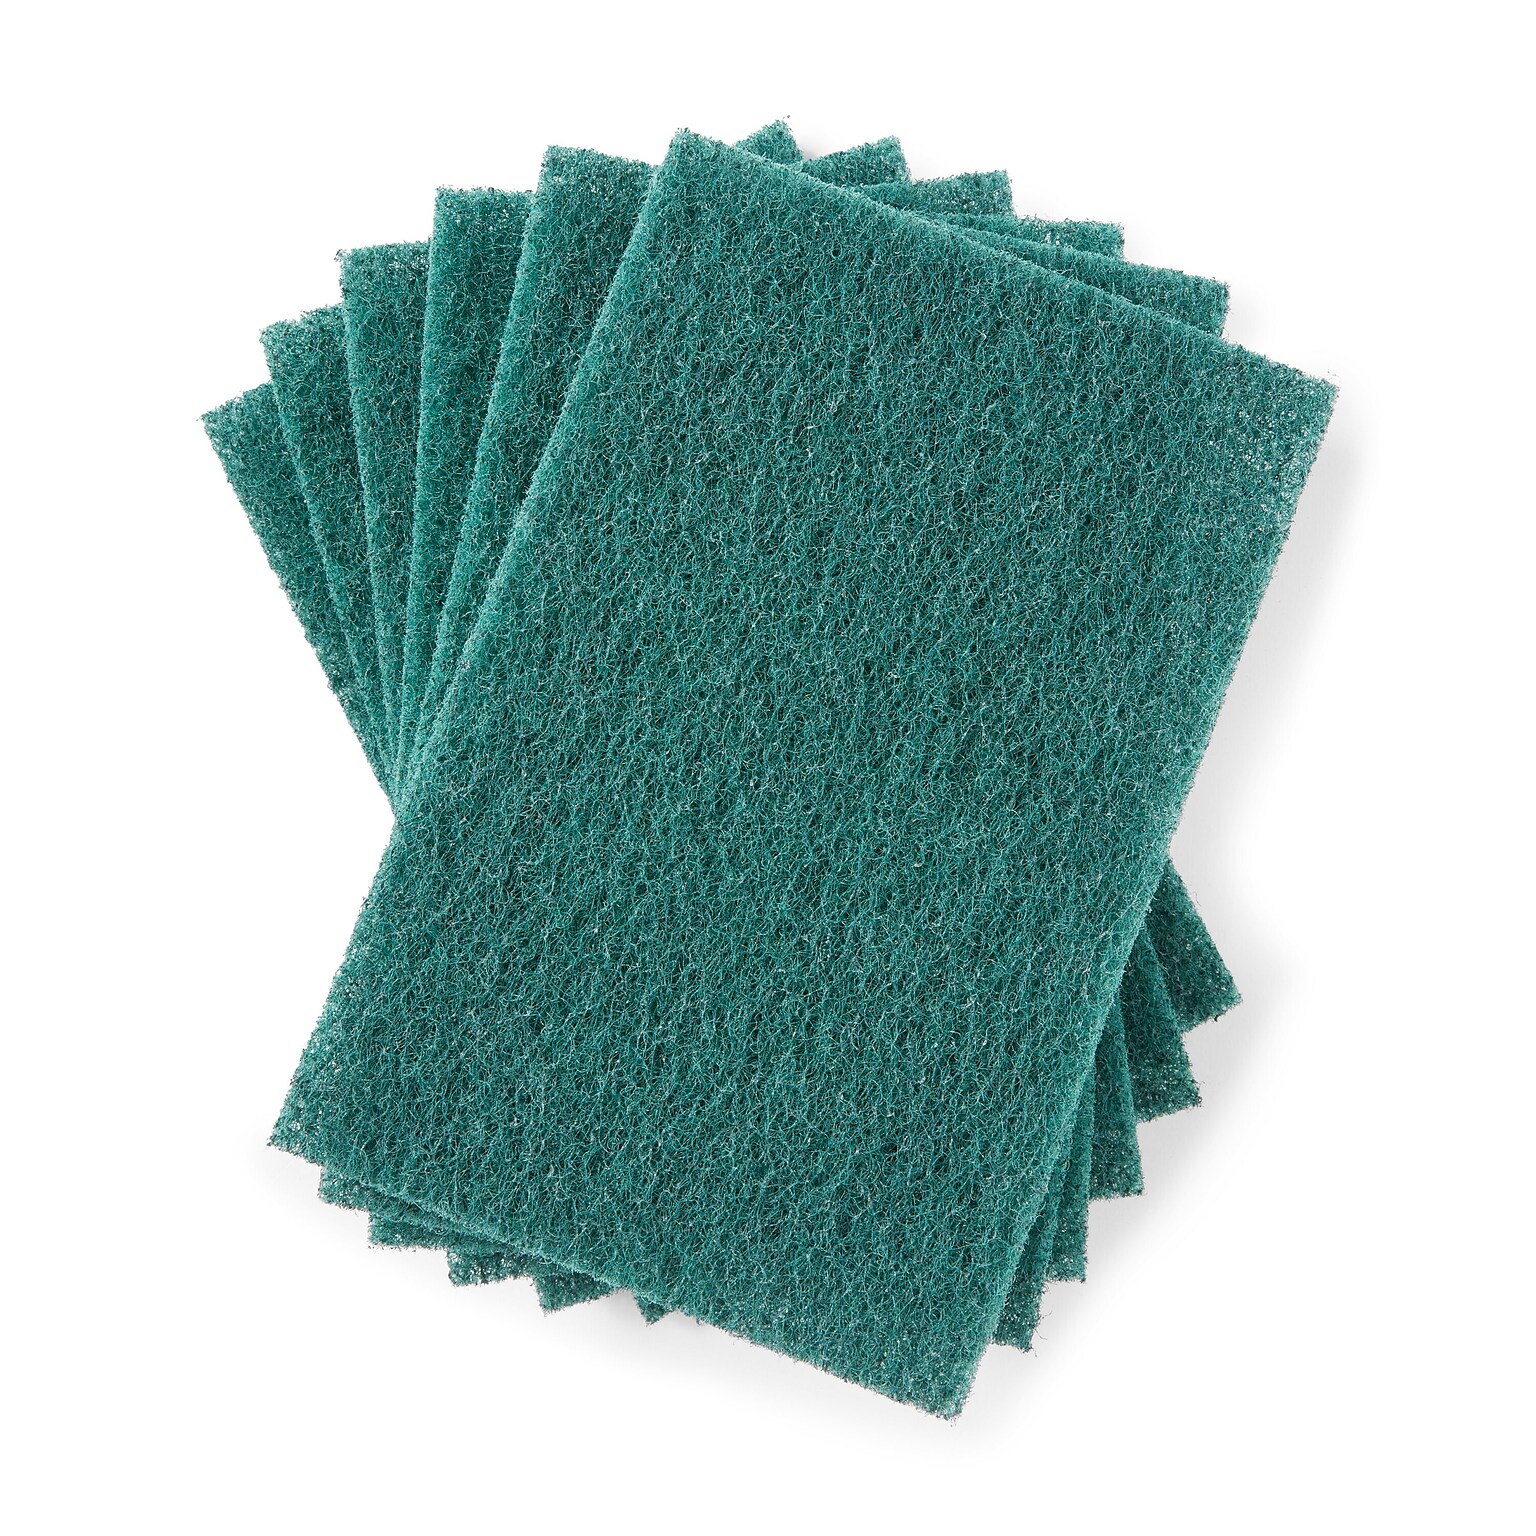 Coastwide Professional™ Heavy Duty Scouring Pad, Green, 12/Pack (CW56790)